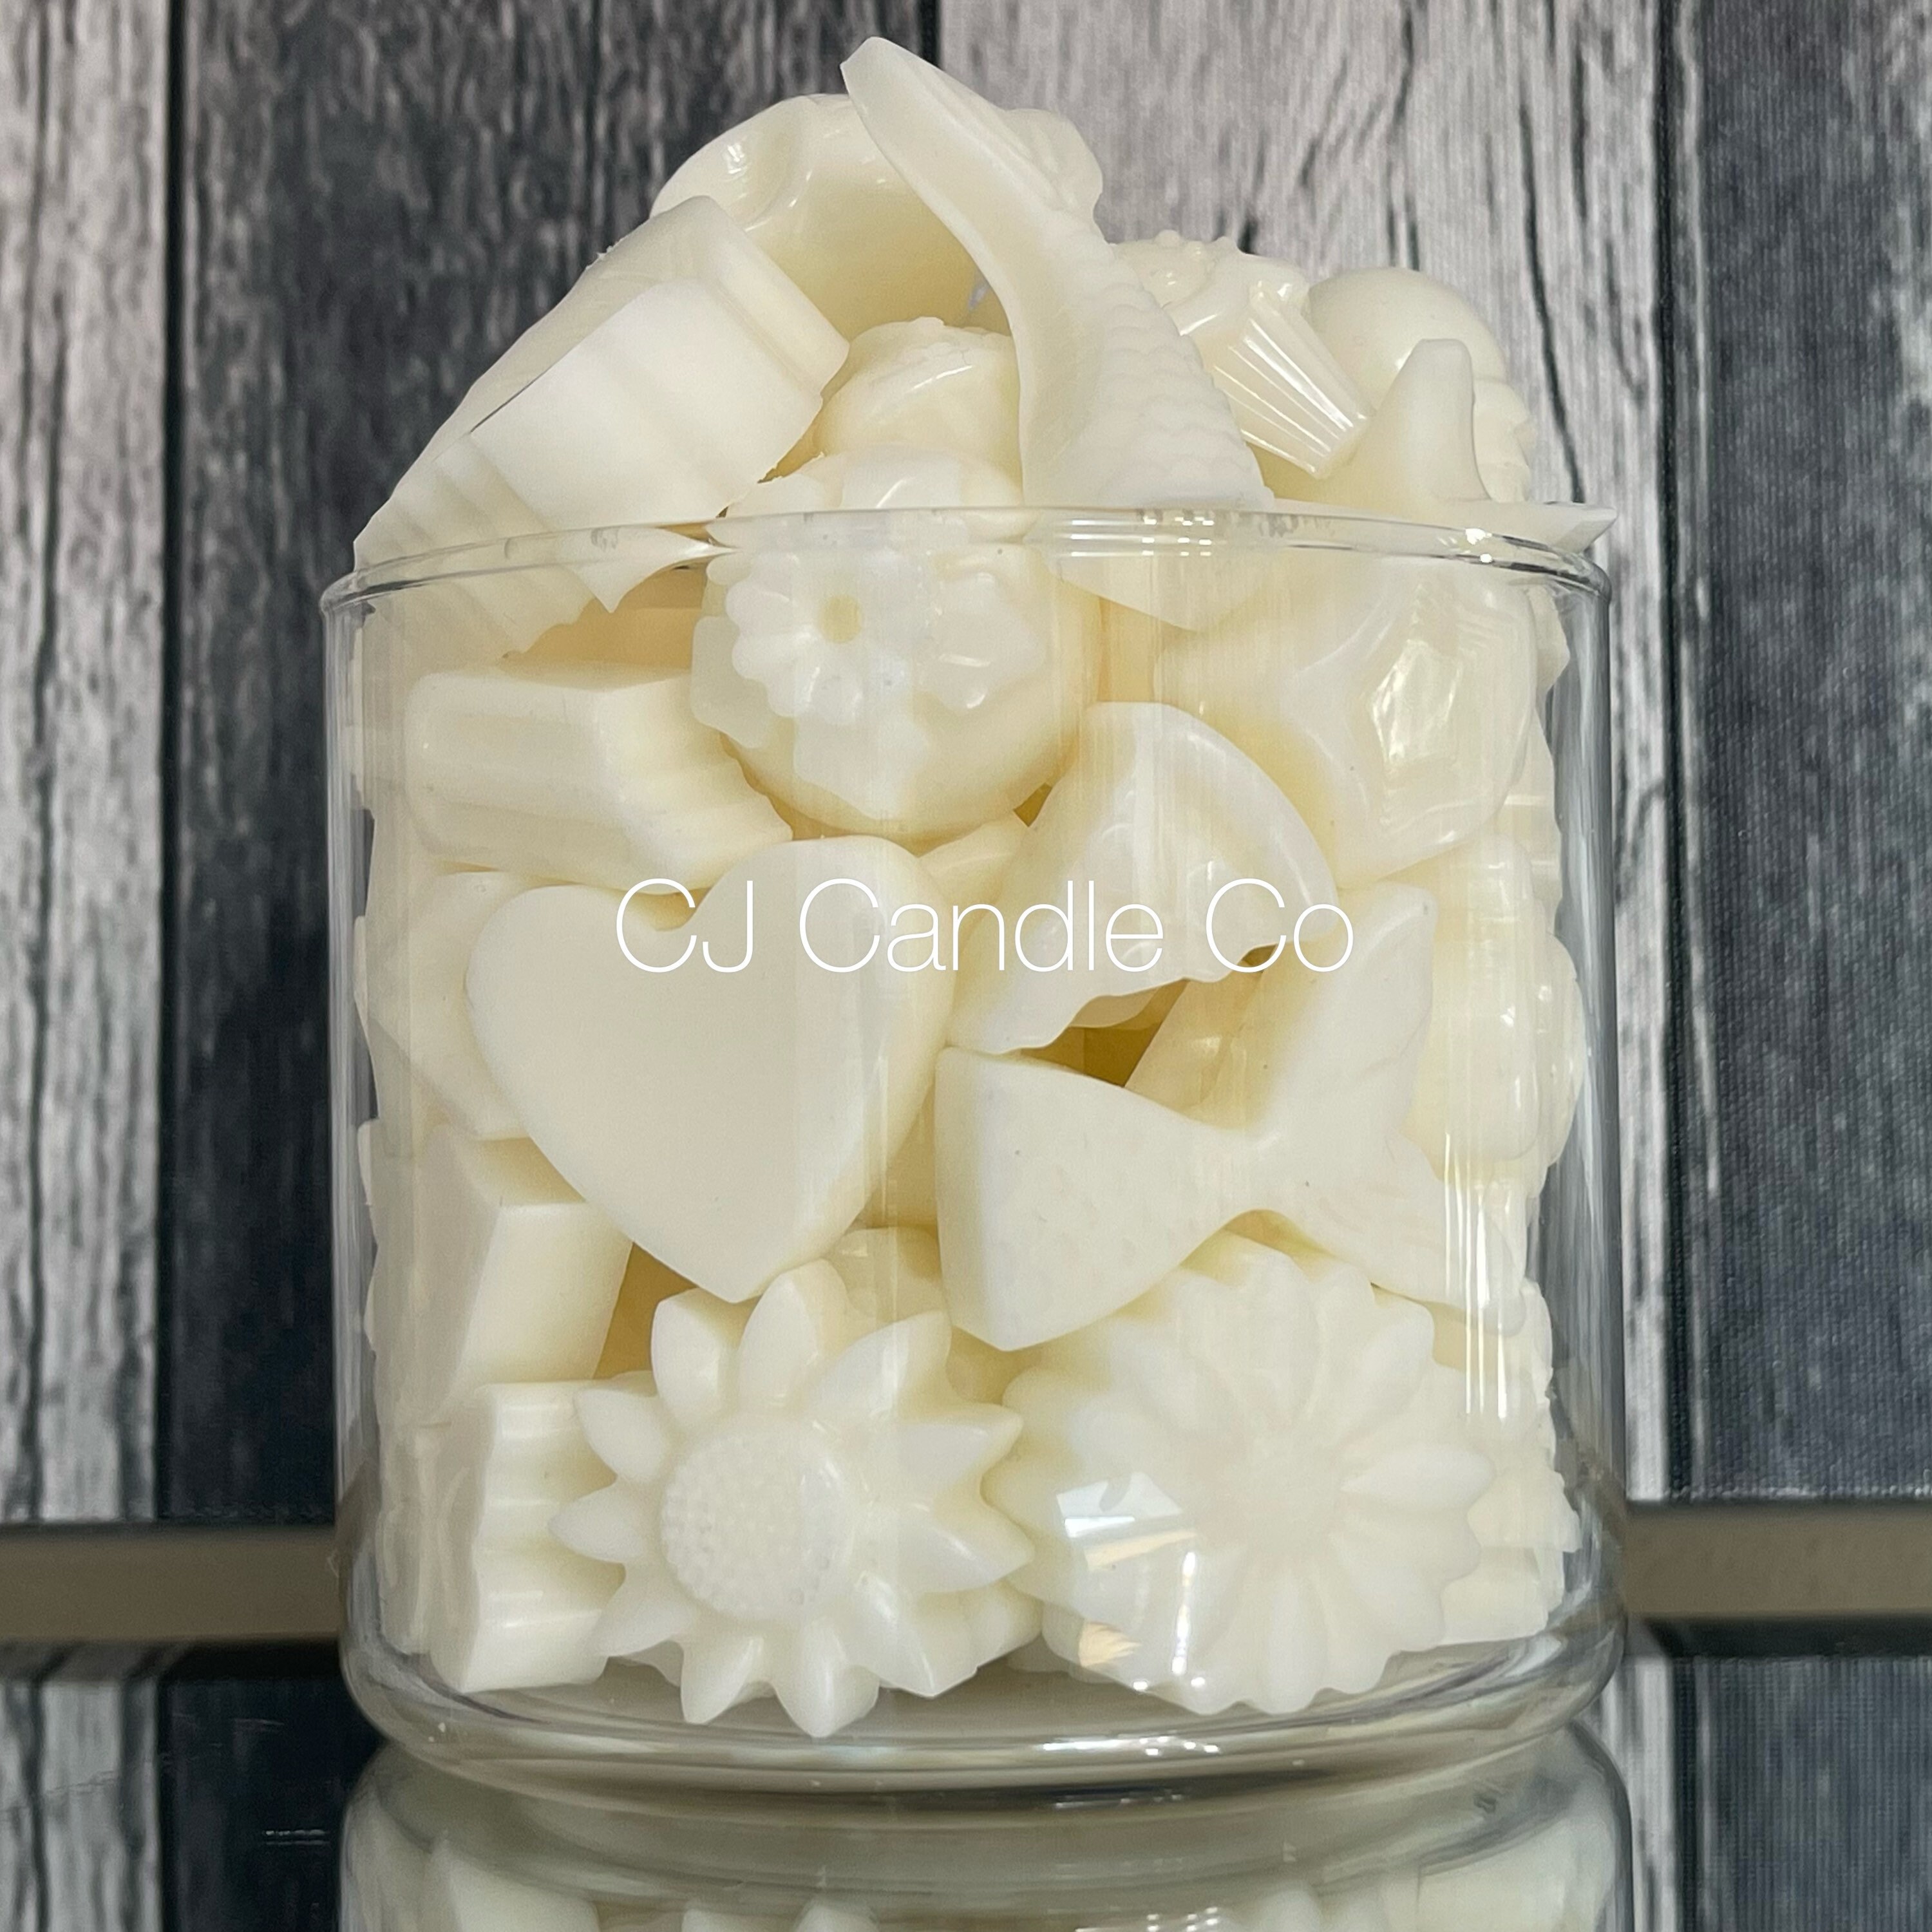 Cactus Blossom Bath & Body Works Candle Wax Melts BBW Wax Melts Perfect  Gift for Mom, Sister, Best Friend, Valentines Day Anniversary -  Israel